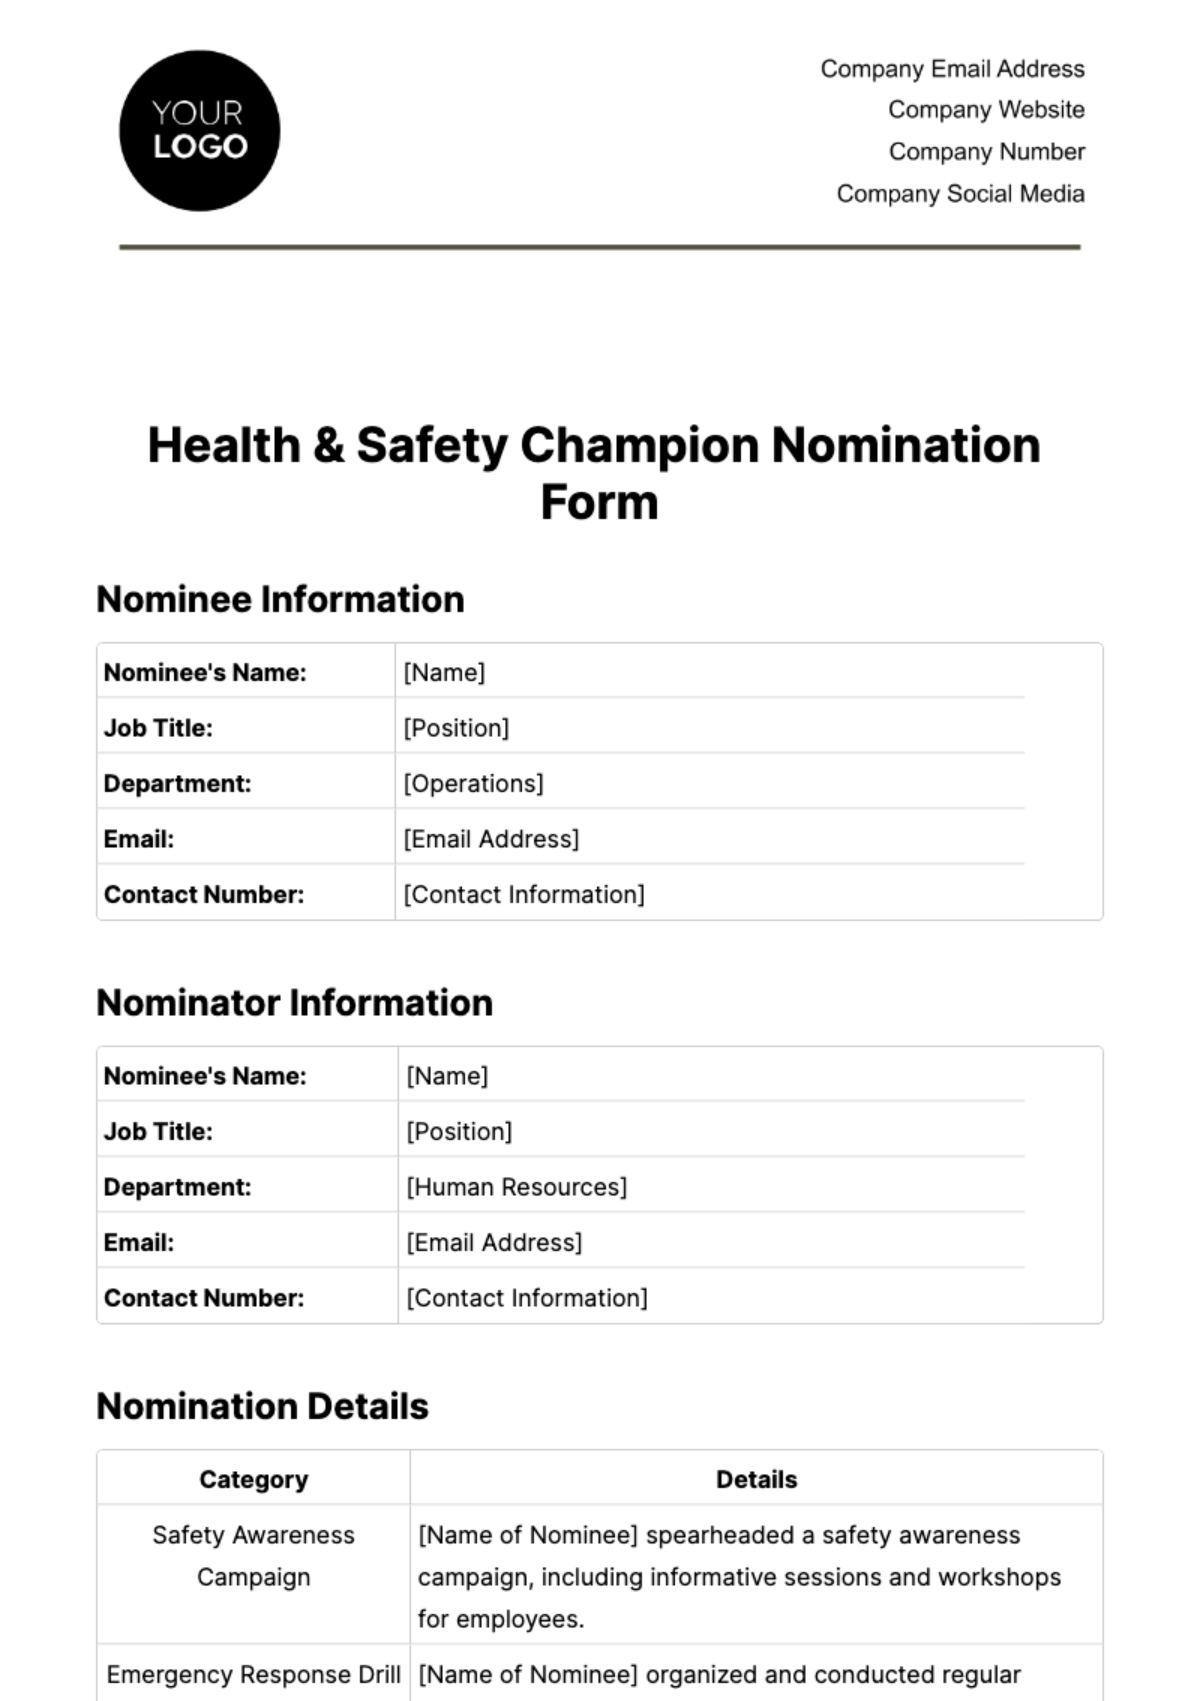 Health & Safety Champion Nomination Form Template